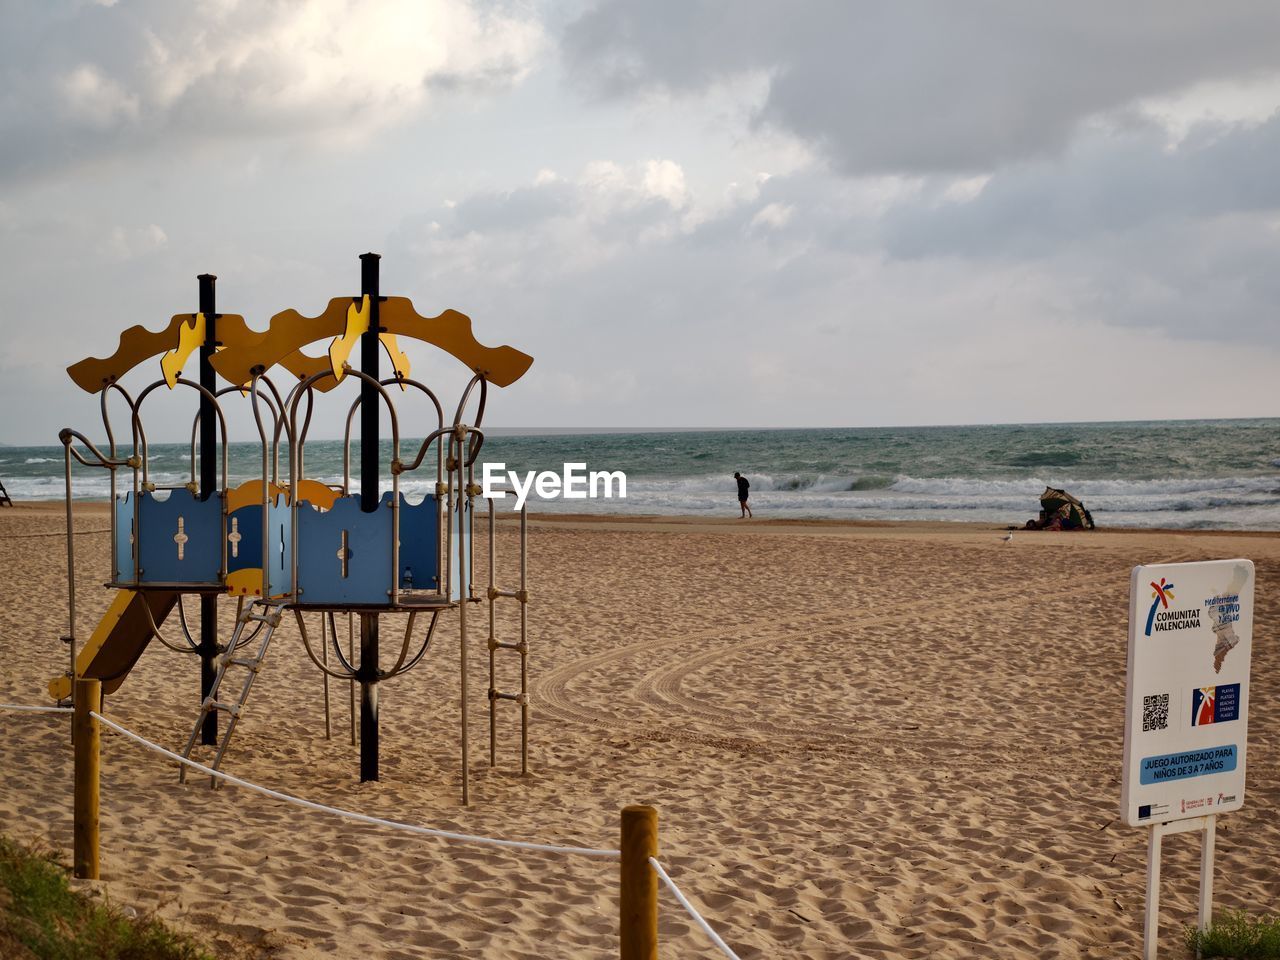 beach, sea, land, sky, water, sand, cloud, nature, coast, horizon over water, ocean, shore, horizon, vacation, body of water, lifeguard hut, lifeguard, scenics - nature, trip, holiday, travel destinations, beauty in nature, man made structure, hut, tranquility, walkway, travel, chair, tranquil scene, architecture, outdoors, coastline, protection, summer, day, tourism, no people, security, seat, boardwalk, absence, sunset, water's edge, idyllic, built structure